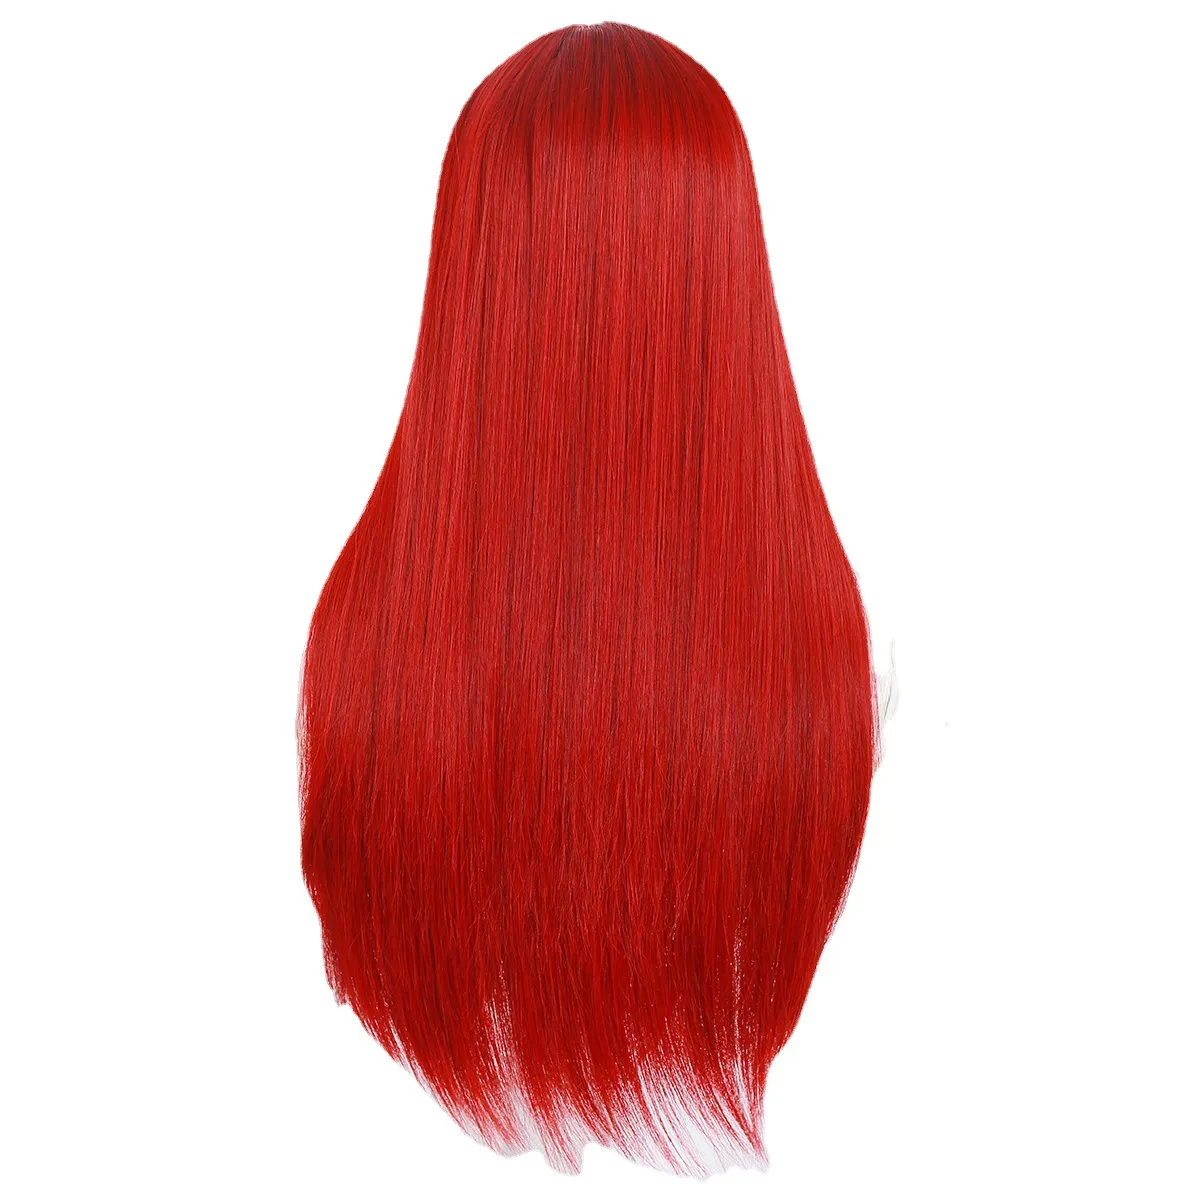 24 Inches Long Straight Synthetic Wig Simulation Human Hair Wigs for Women CX-18763